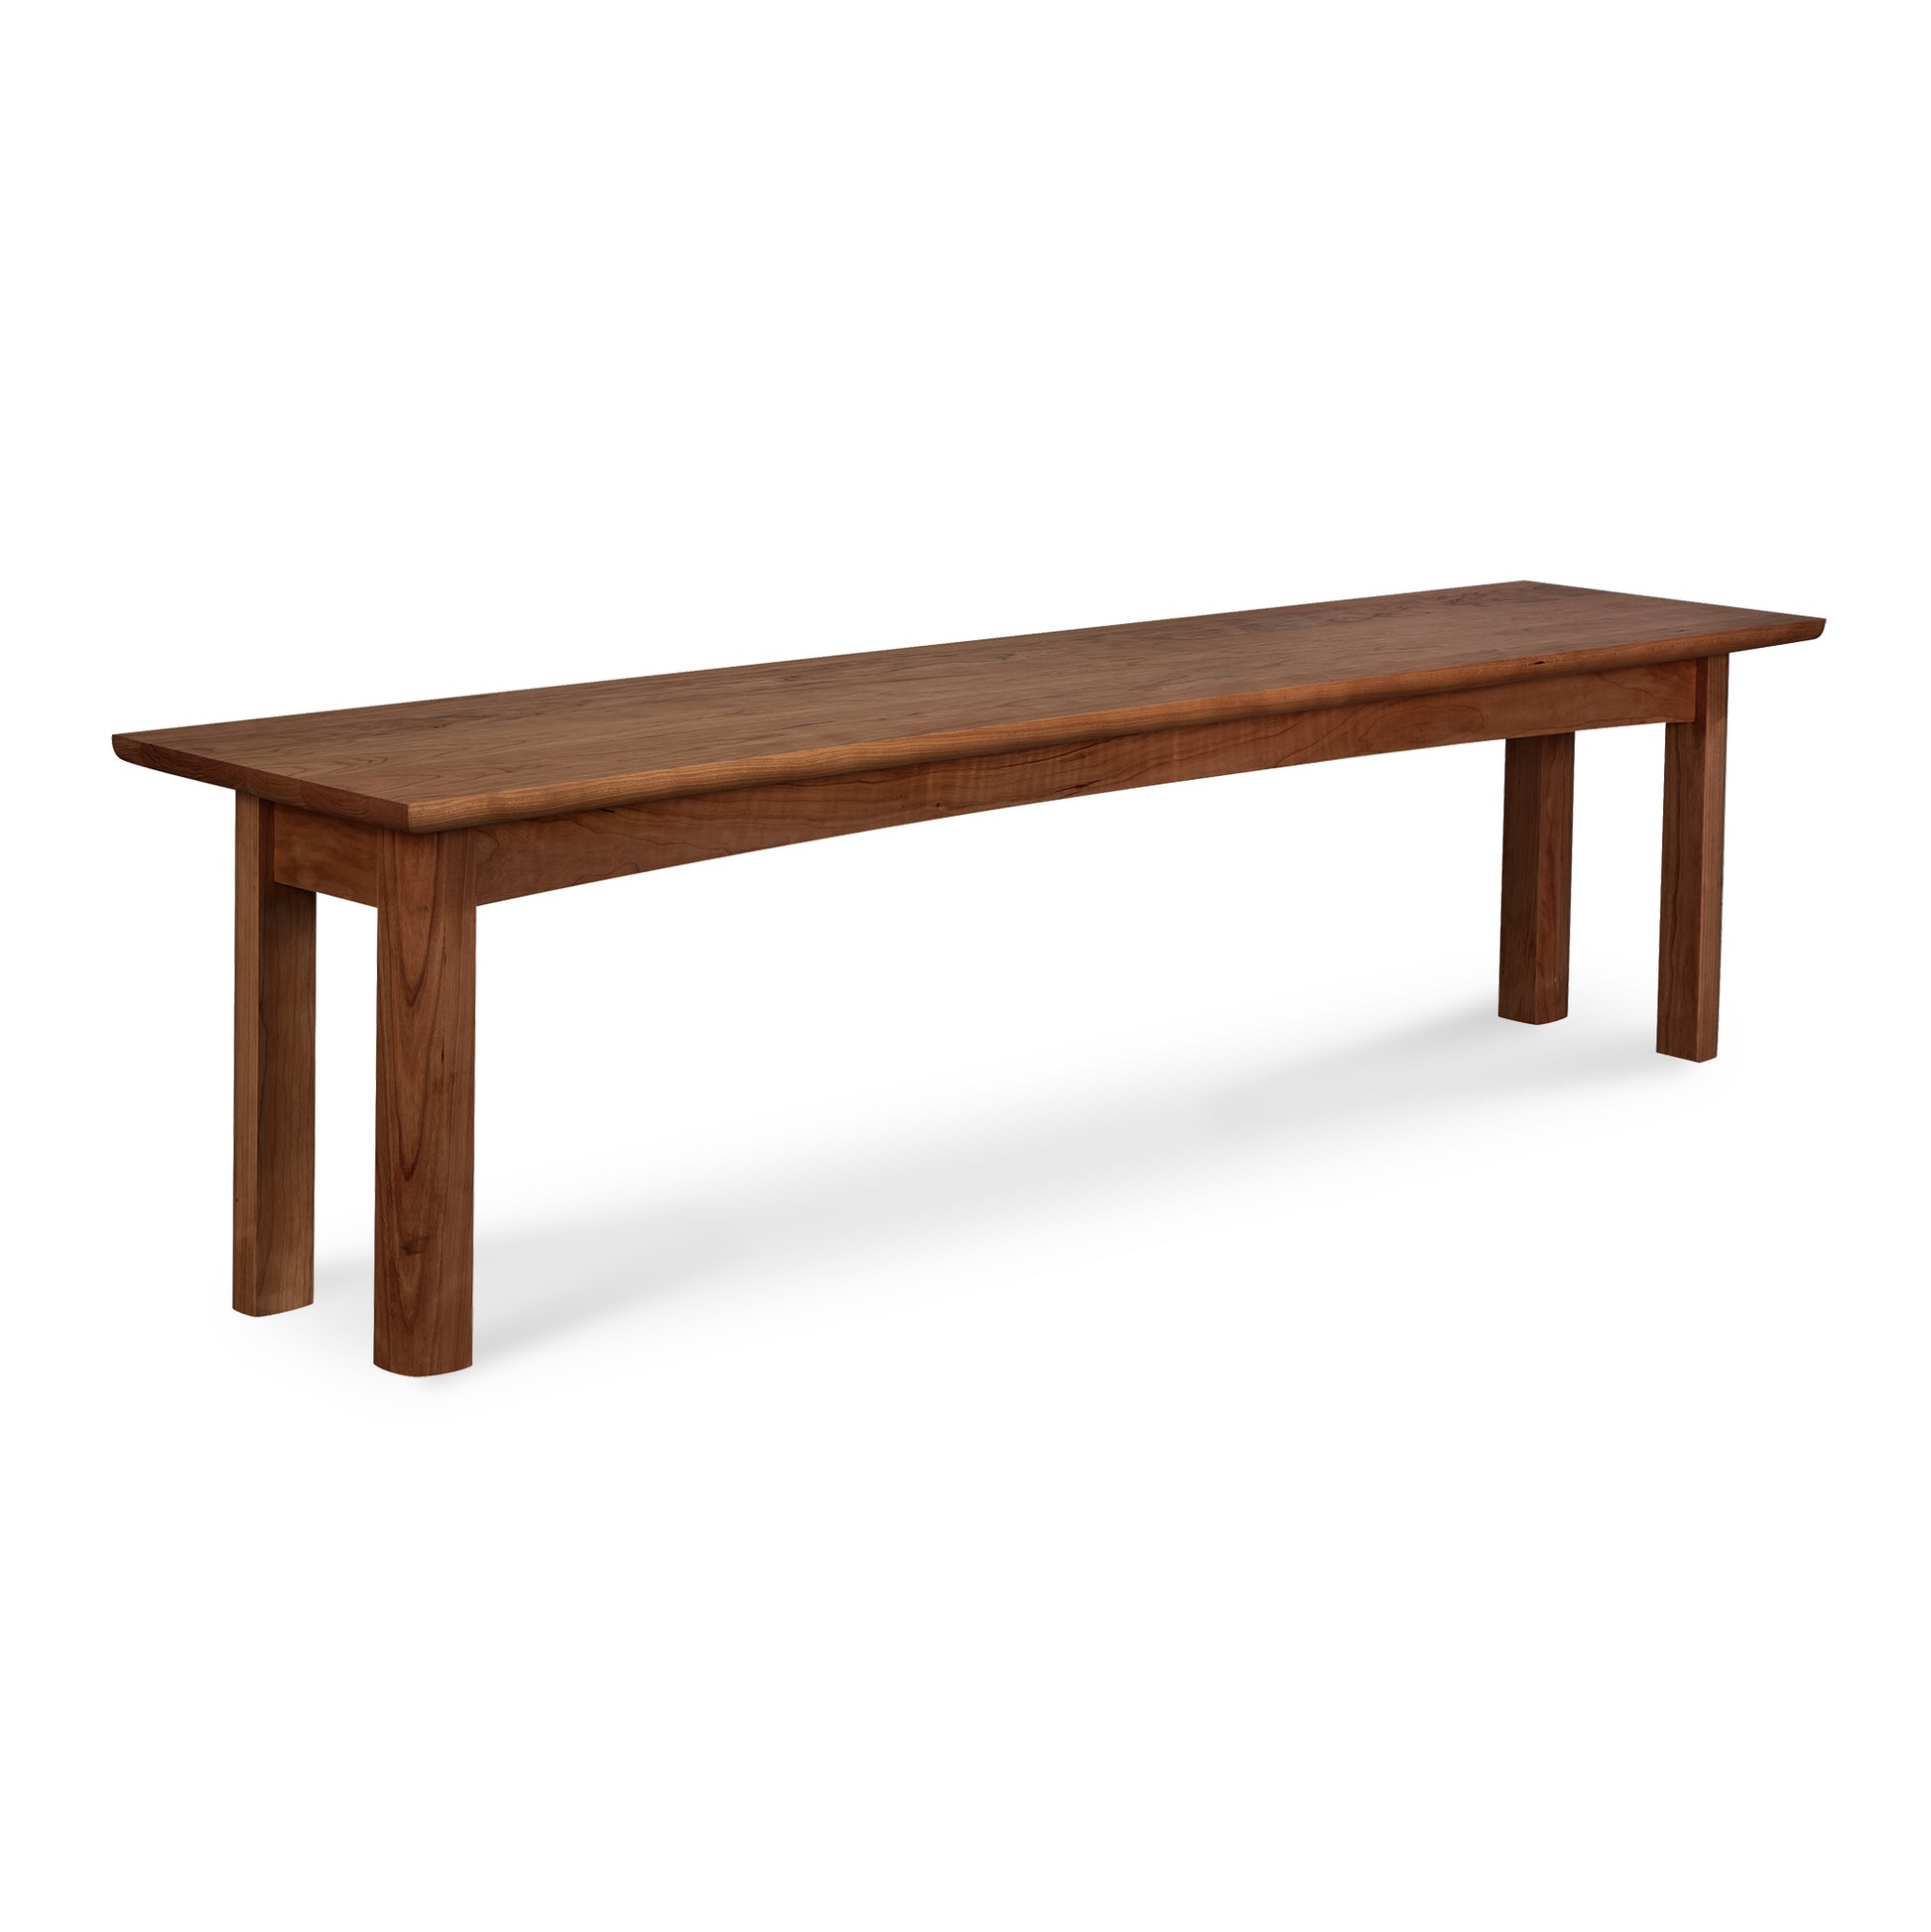 A Heartwood Shaker Bench by Vermont Furniture Designs isolated on a white background.